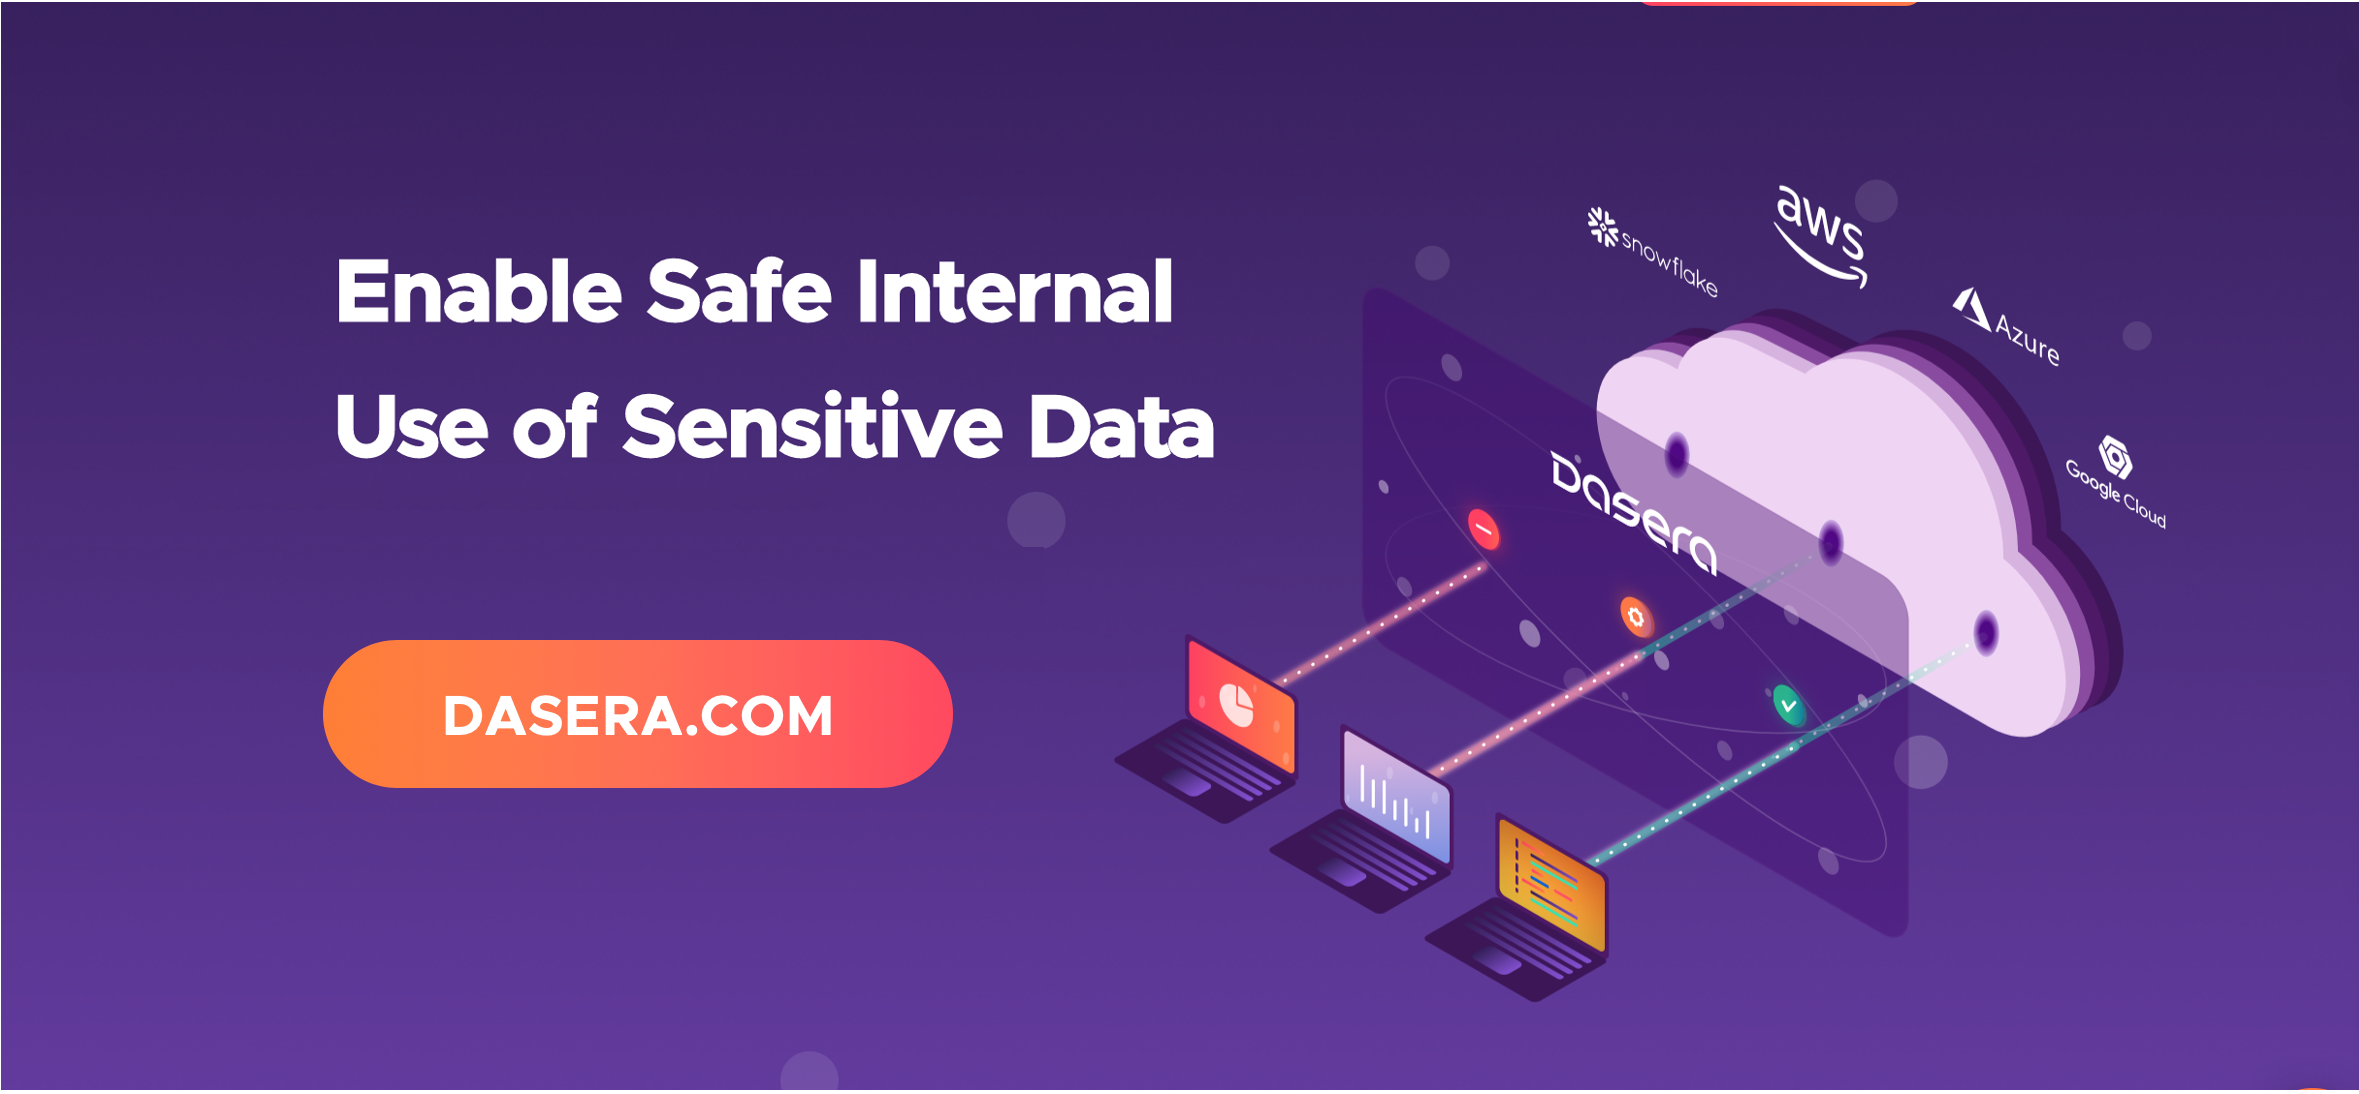 dasera-safe use of isensitive data-insider threats-data breaches-dataexfiltration-privacy violations-ccpa-gdpr